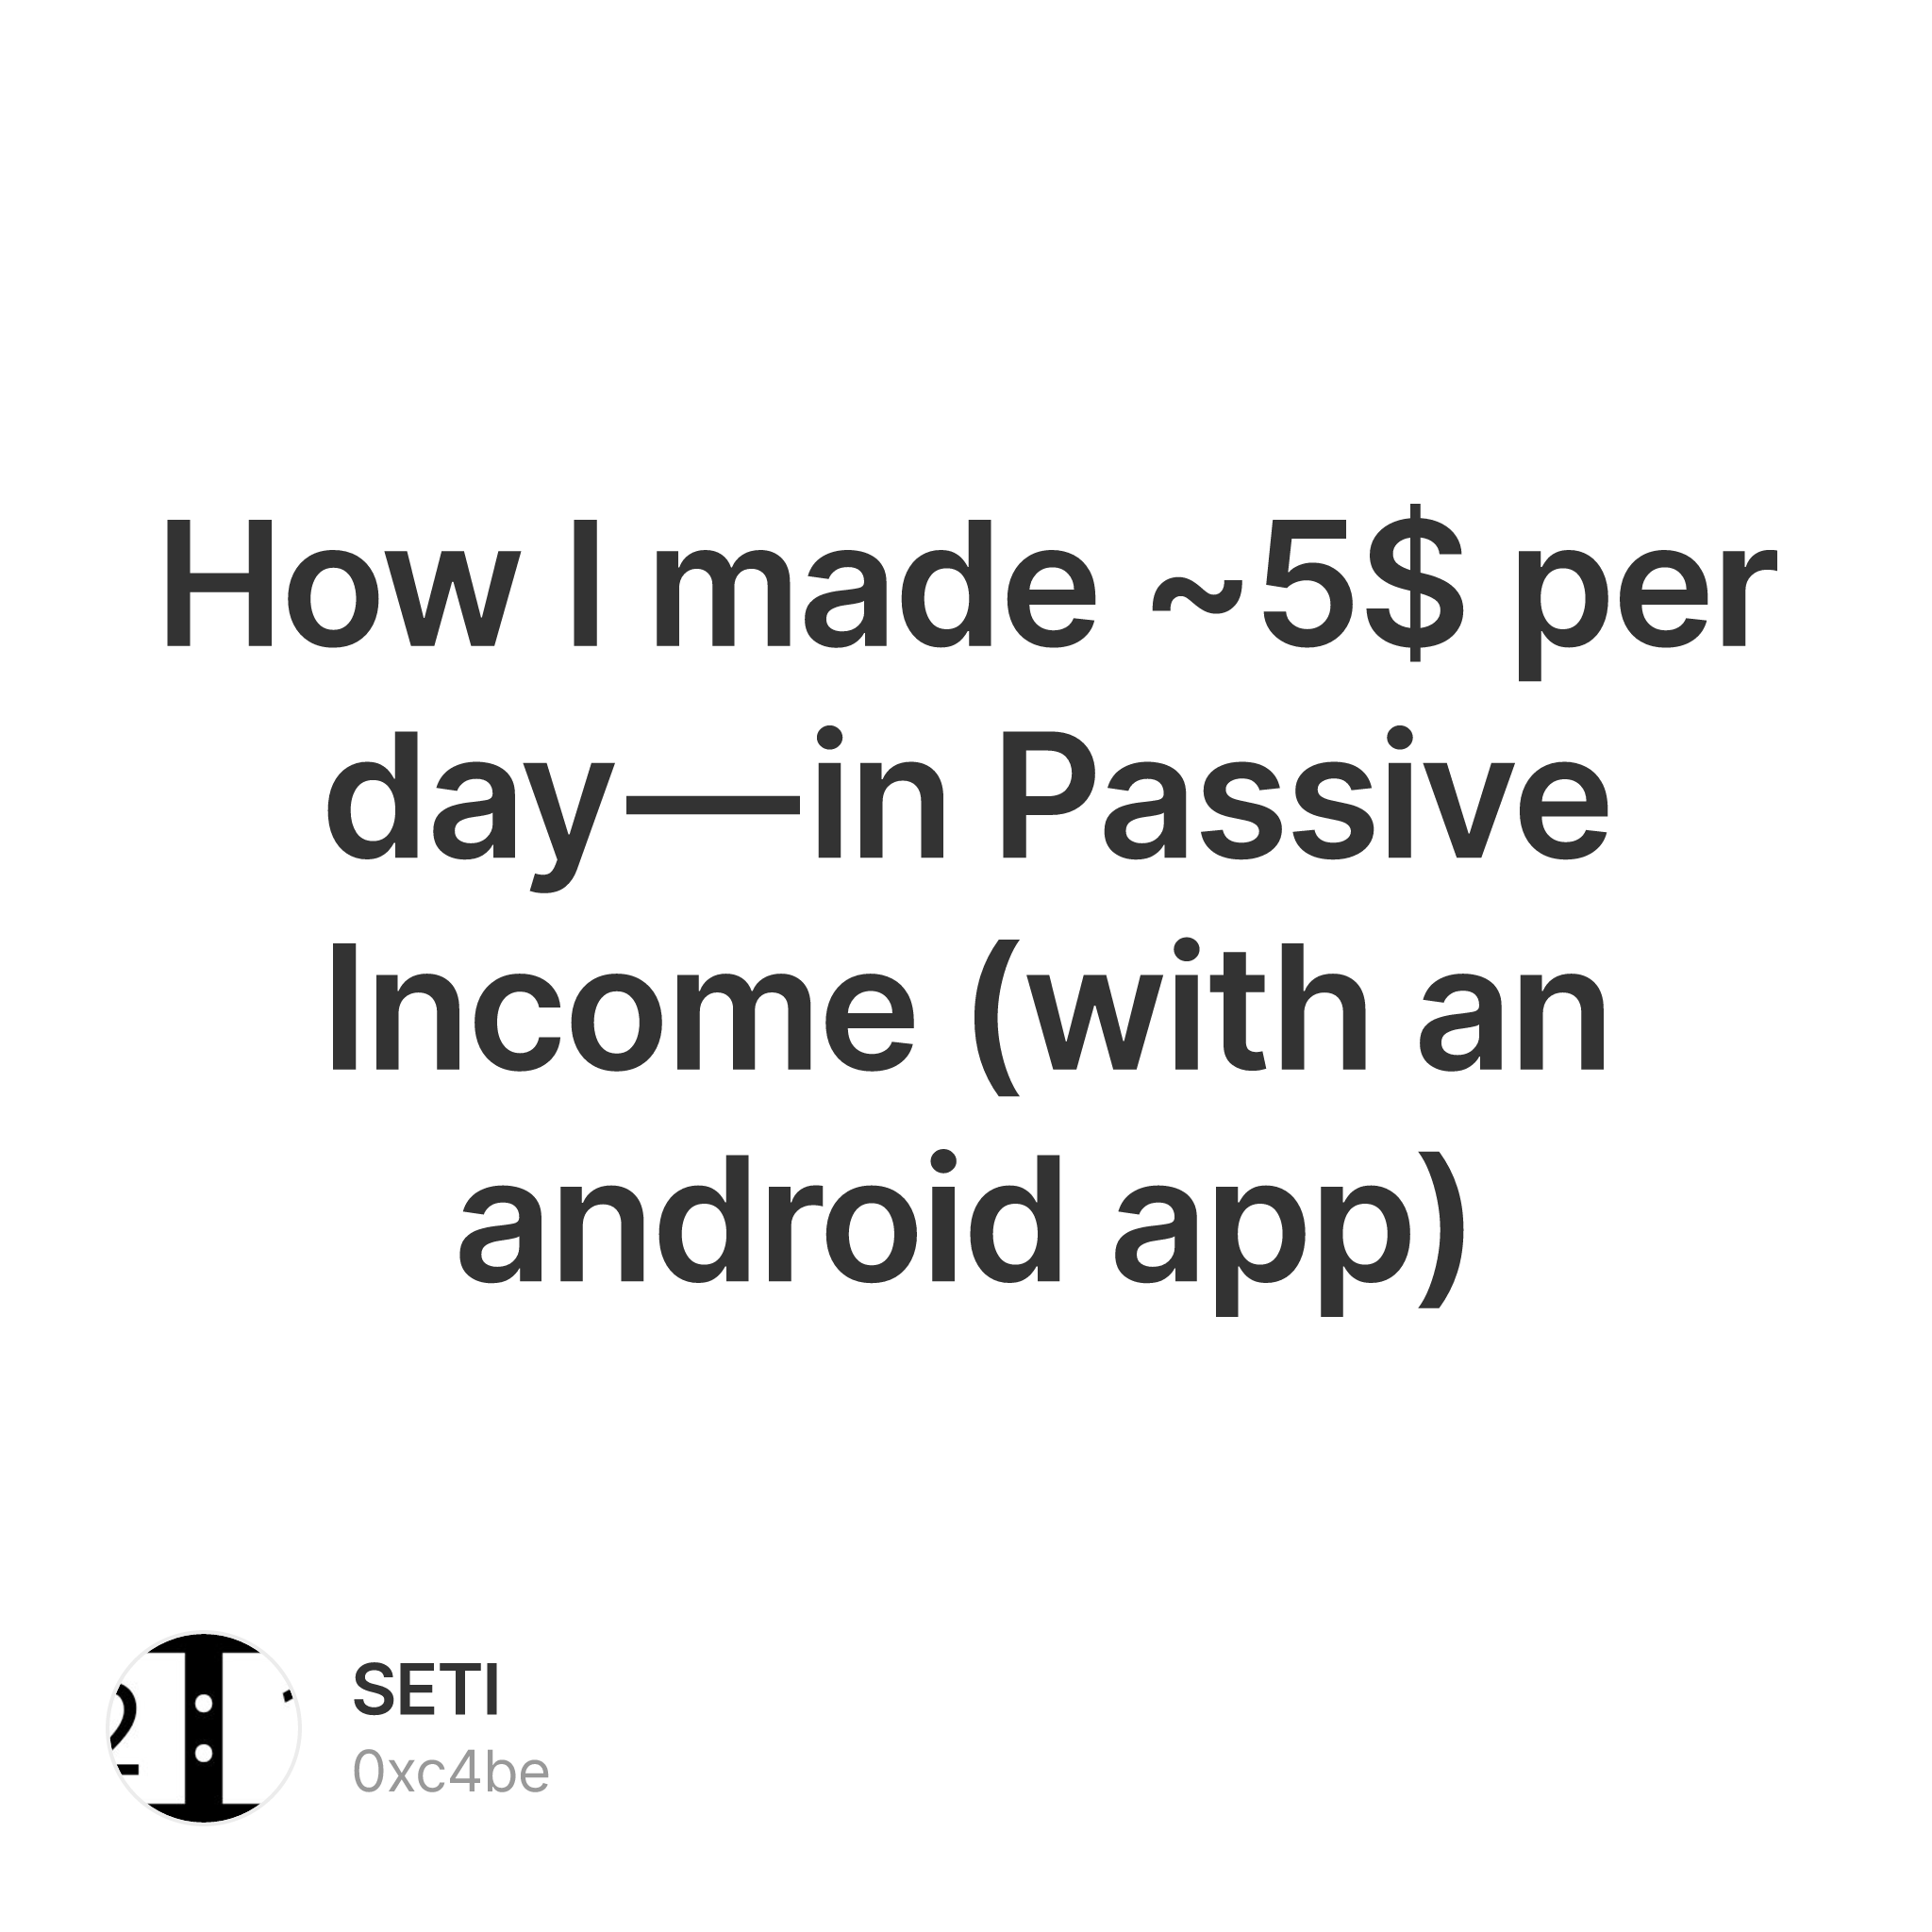 How I made ~5$ per day — in Passive Income (with an android app), by José  Paiva